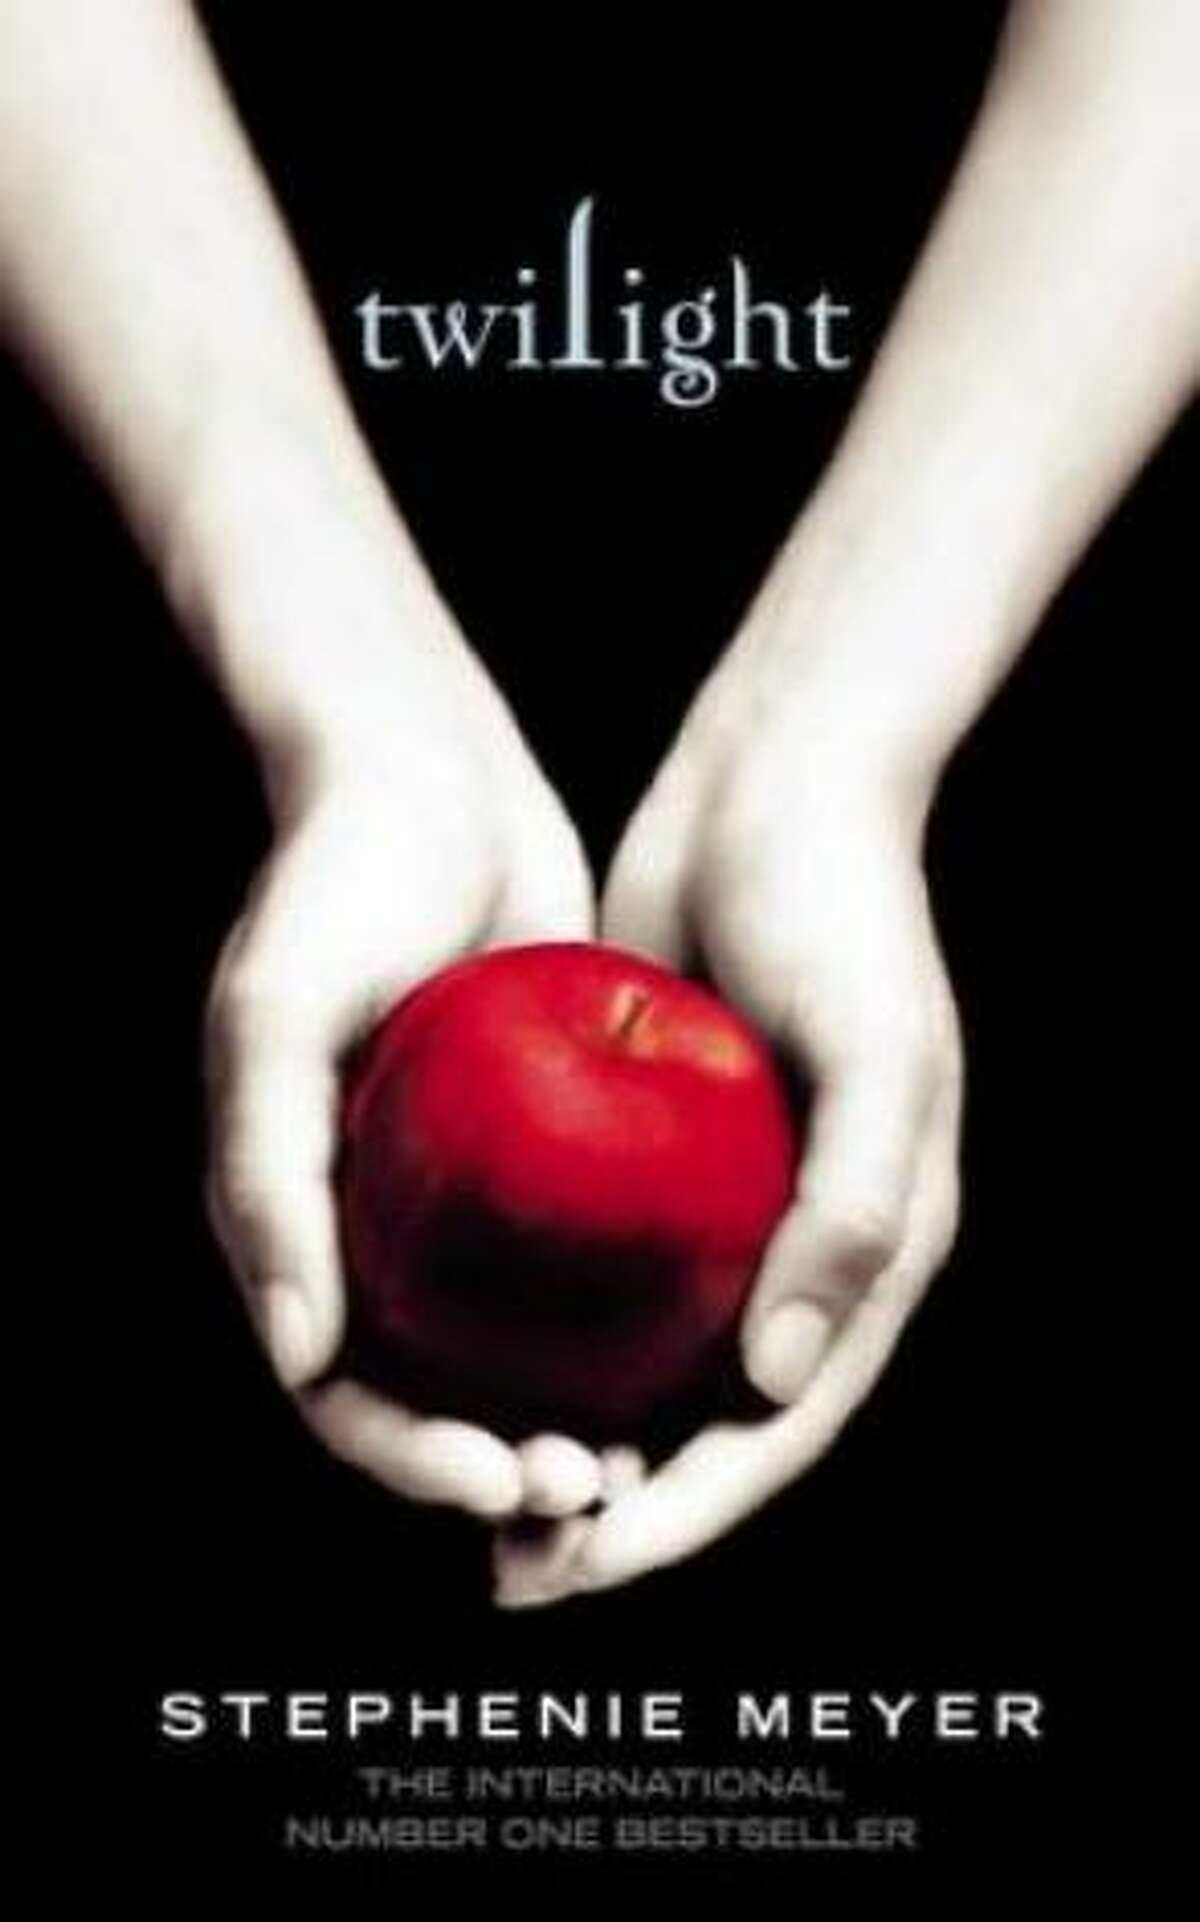 \"Twilight\" (series) by Stephenie Meyer Reasons: Sexually Explicit, Religious Viewpoint, Unsuited to Age Group